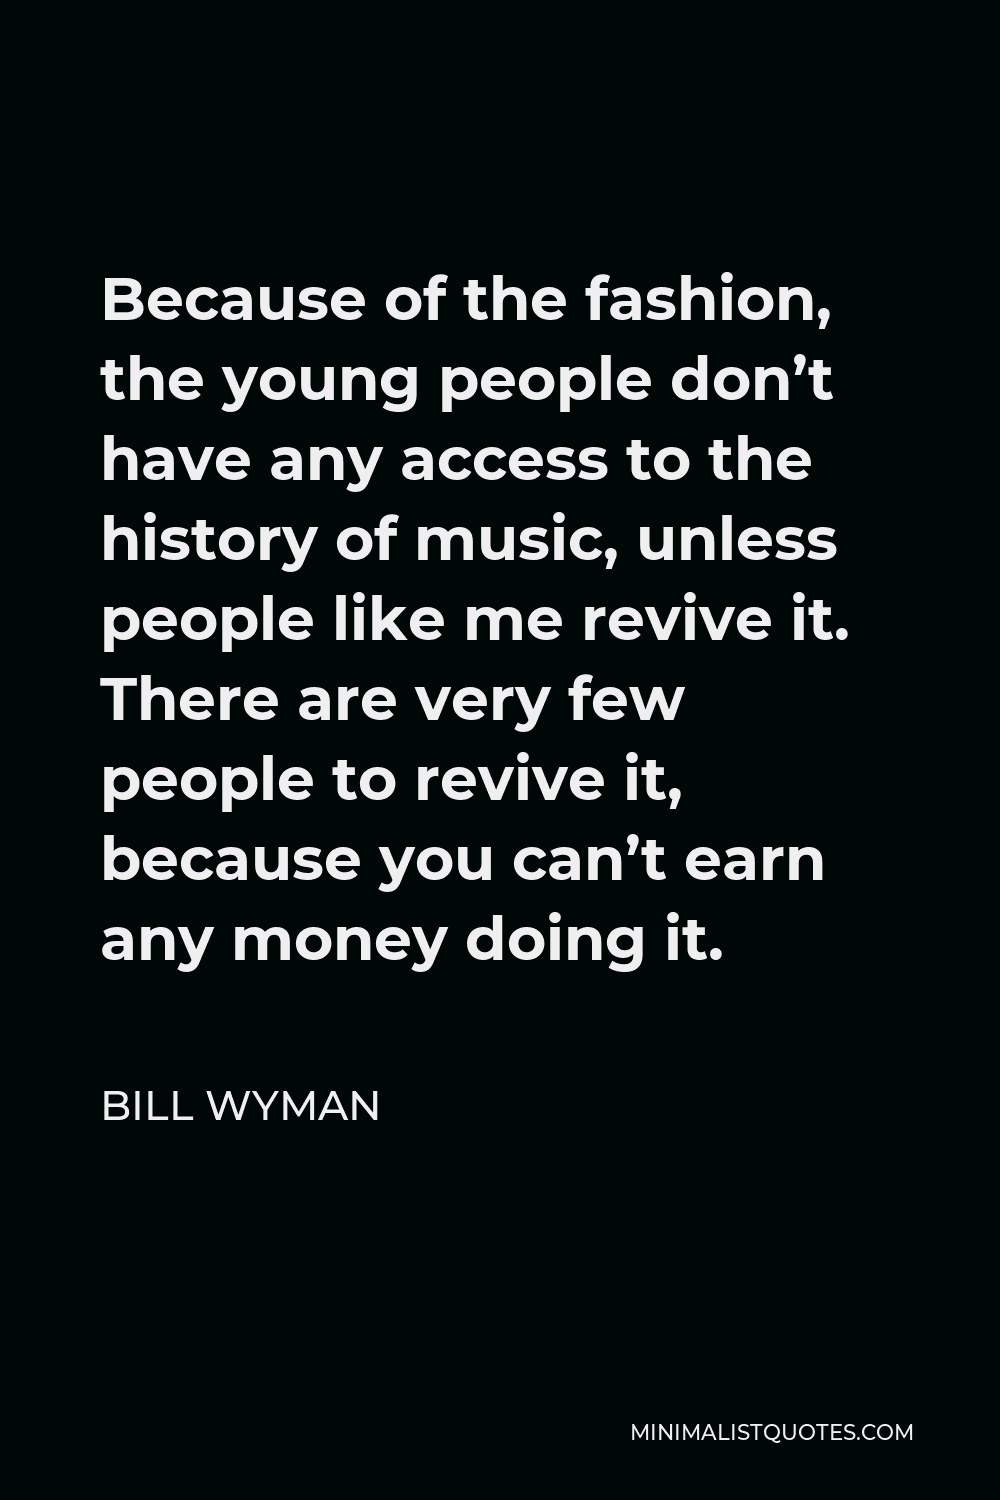 Bill Wyman Quote - Because of the fashion, the young people don’t have any access to the history of music, unless people like me revive it. There are very few people to revive it, because you can’t earn any money doing it.